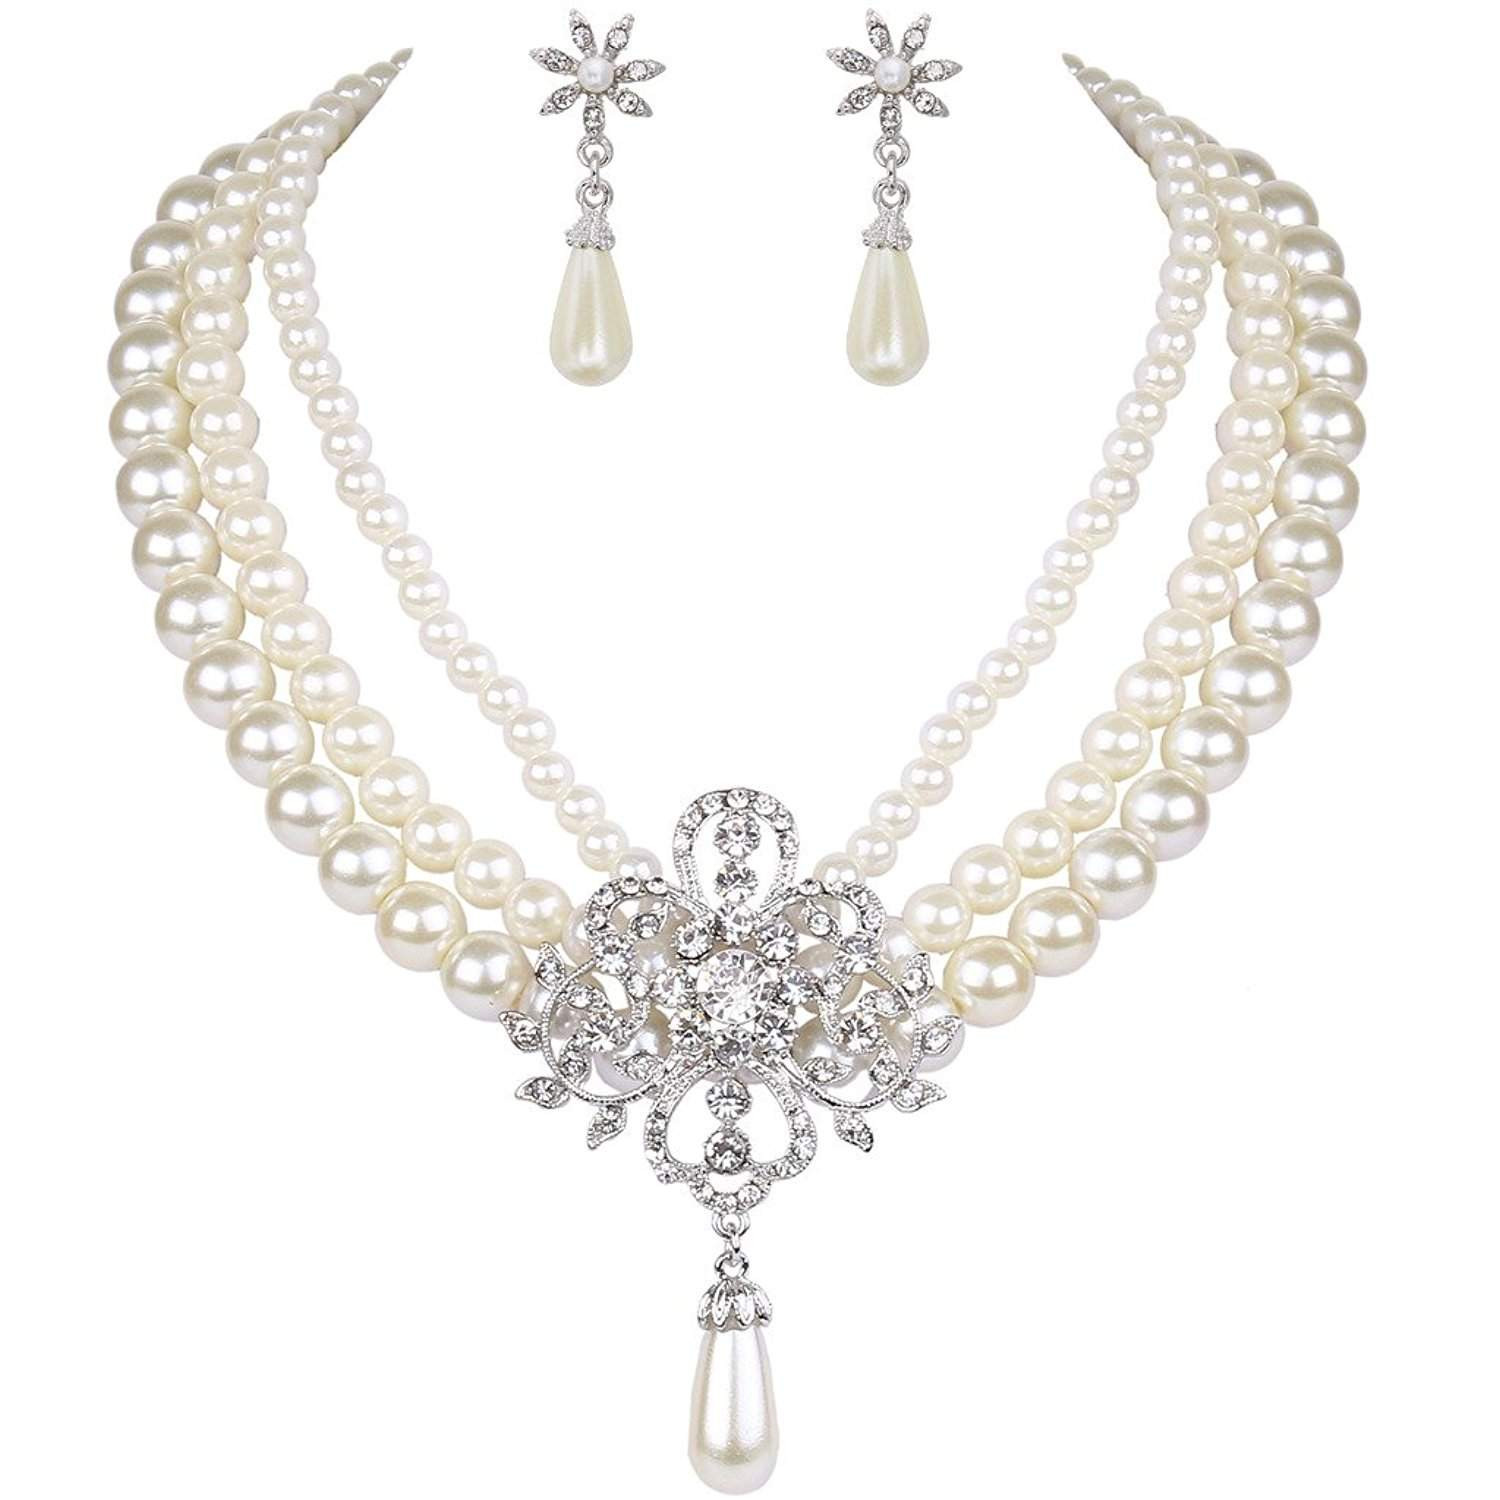 Bridal Party Jewelry Sets
 Top 10 Best Bridesmaid Jewelry Gift Sets